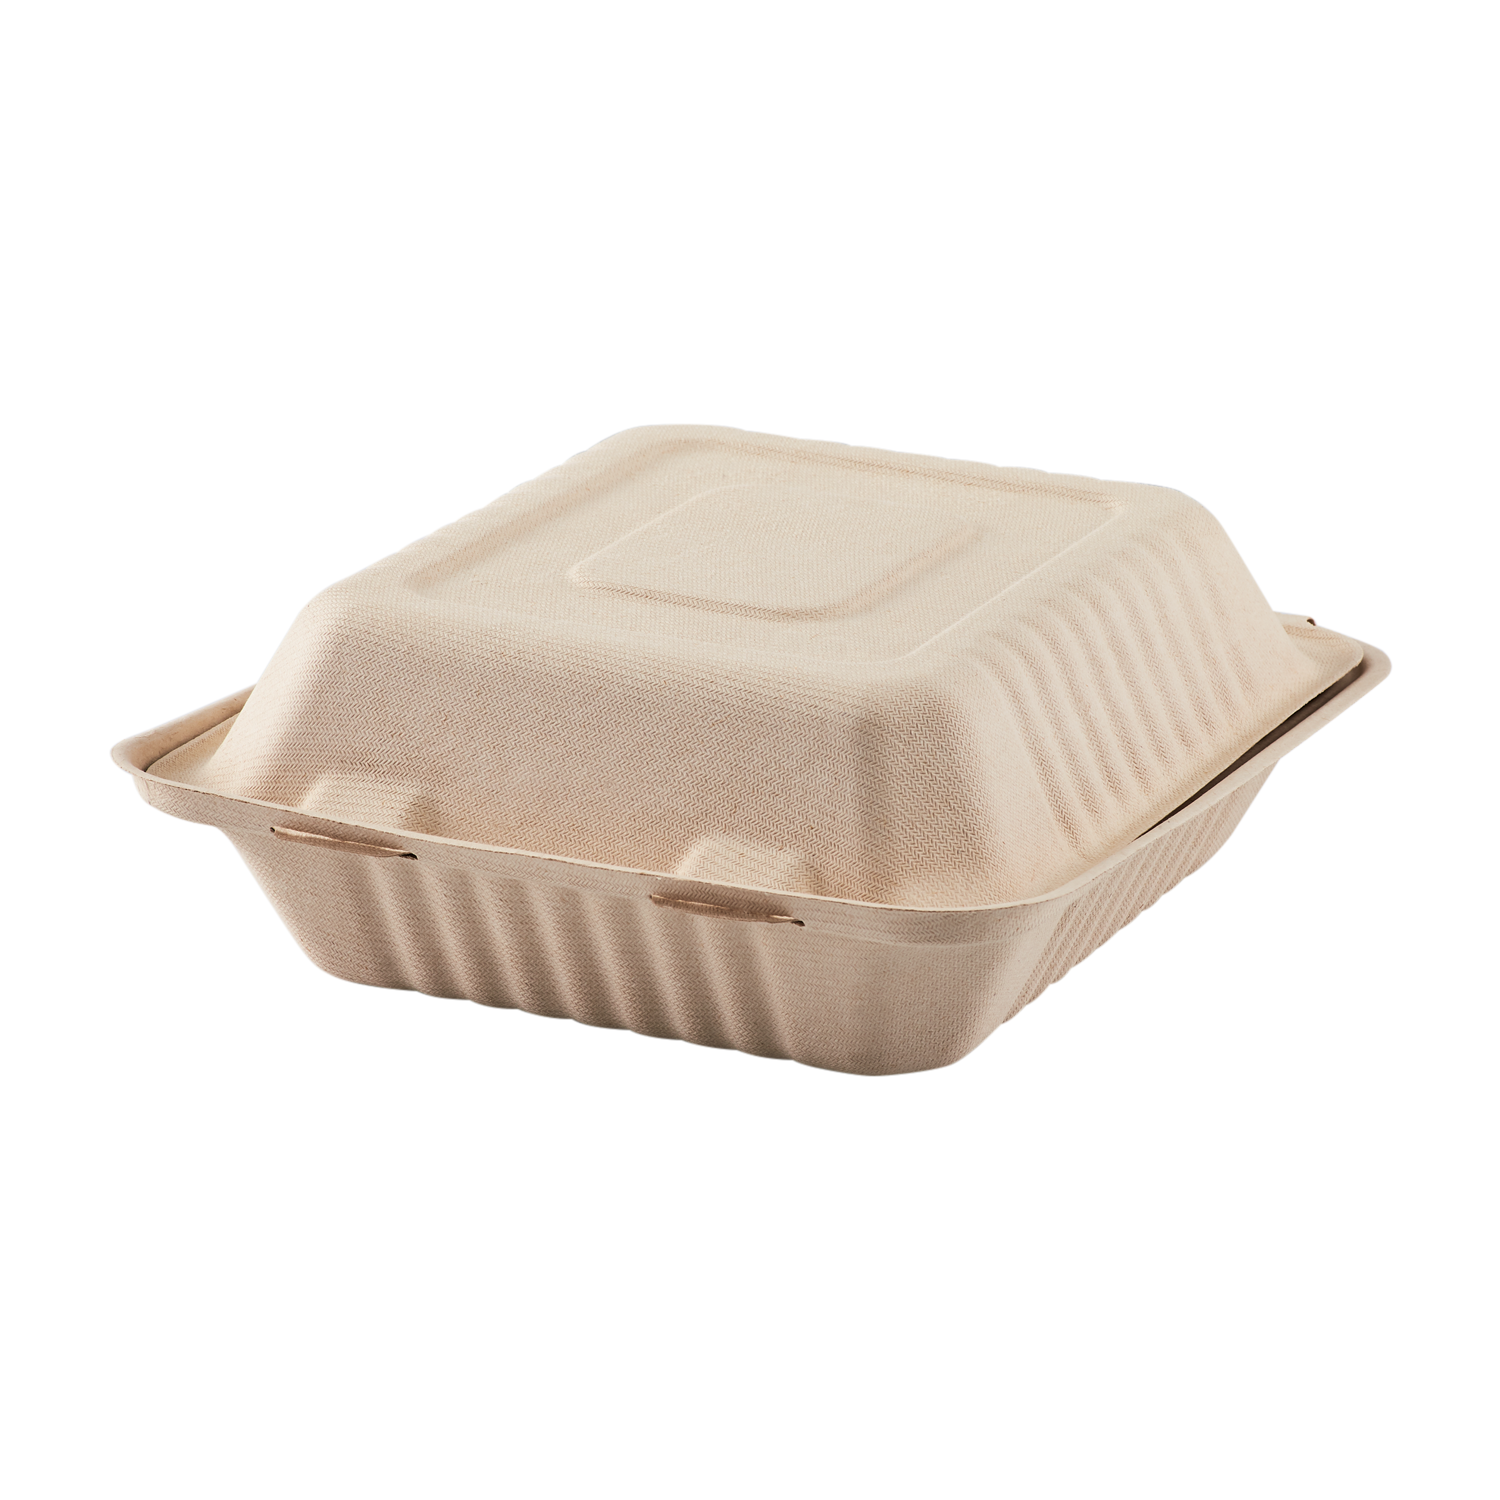 Jade Eco-Takeouts 9 x 9 3-Compartment Food Container by G.E.T. - EC-09-1-JA